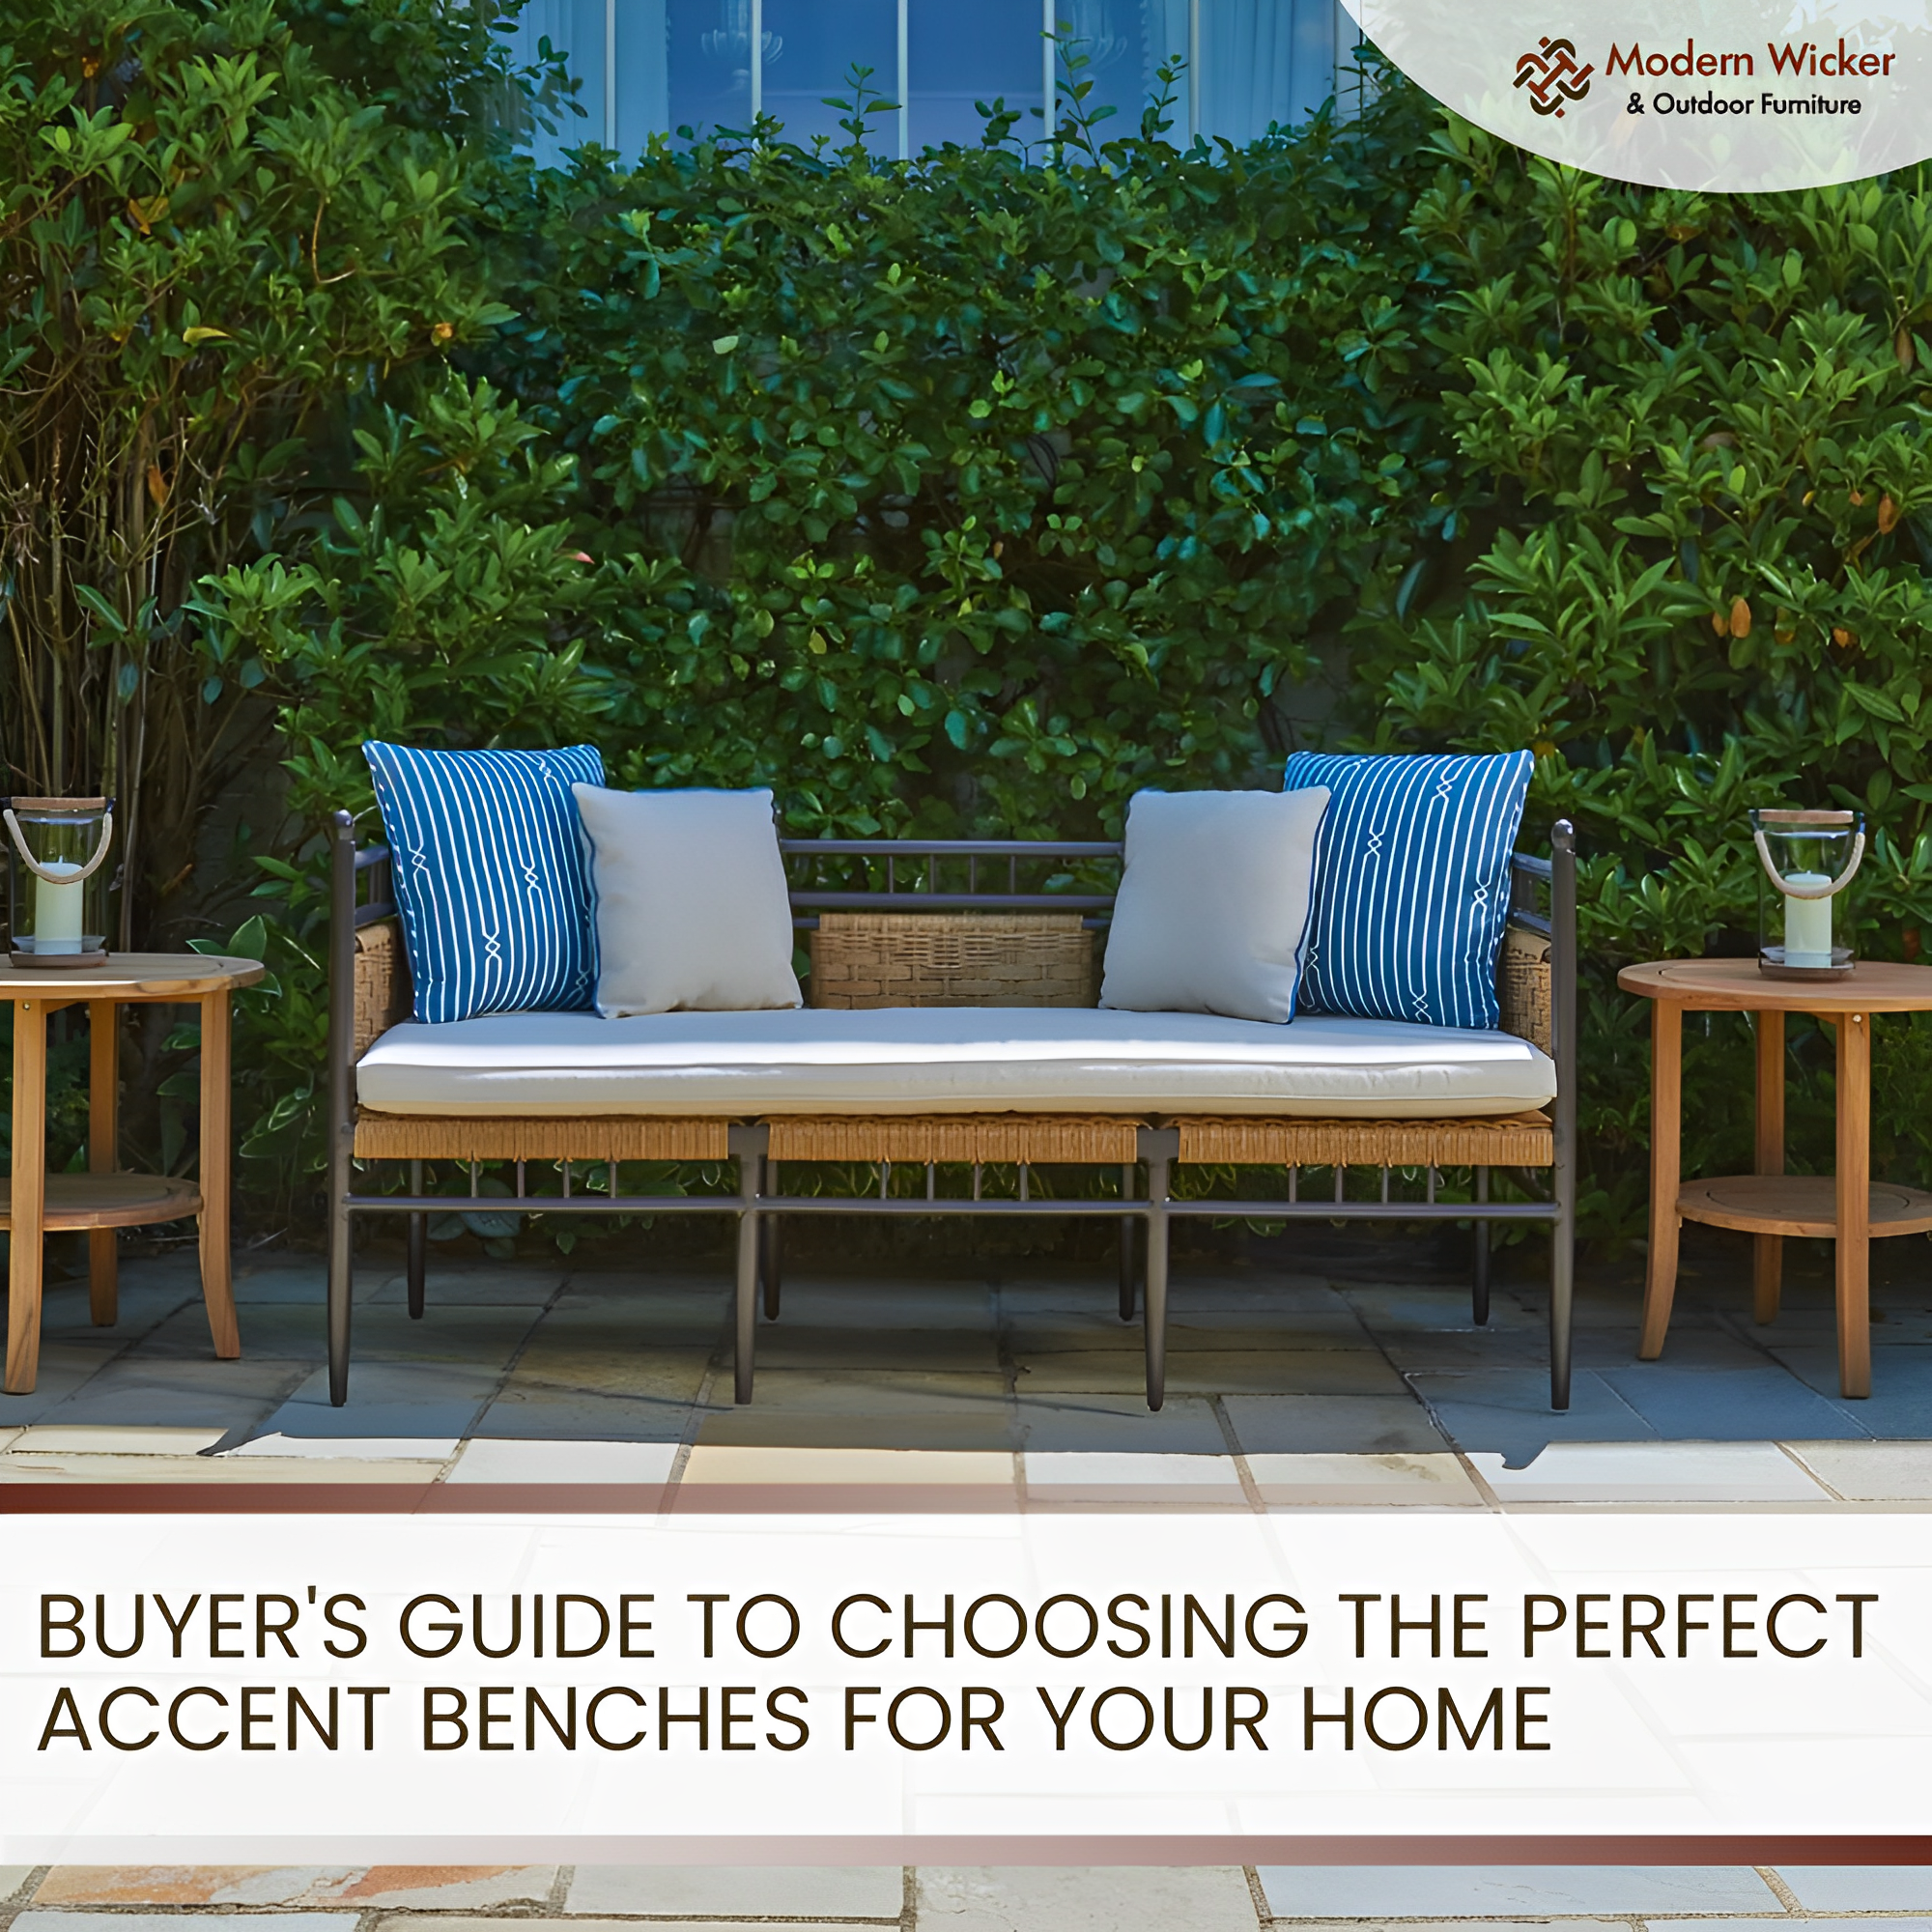 Buyer's Guide to Choosing the Perfect Accent Benches for Your Home